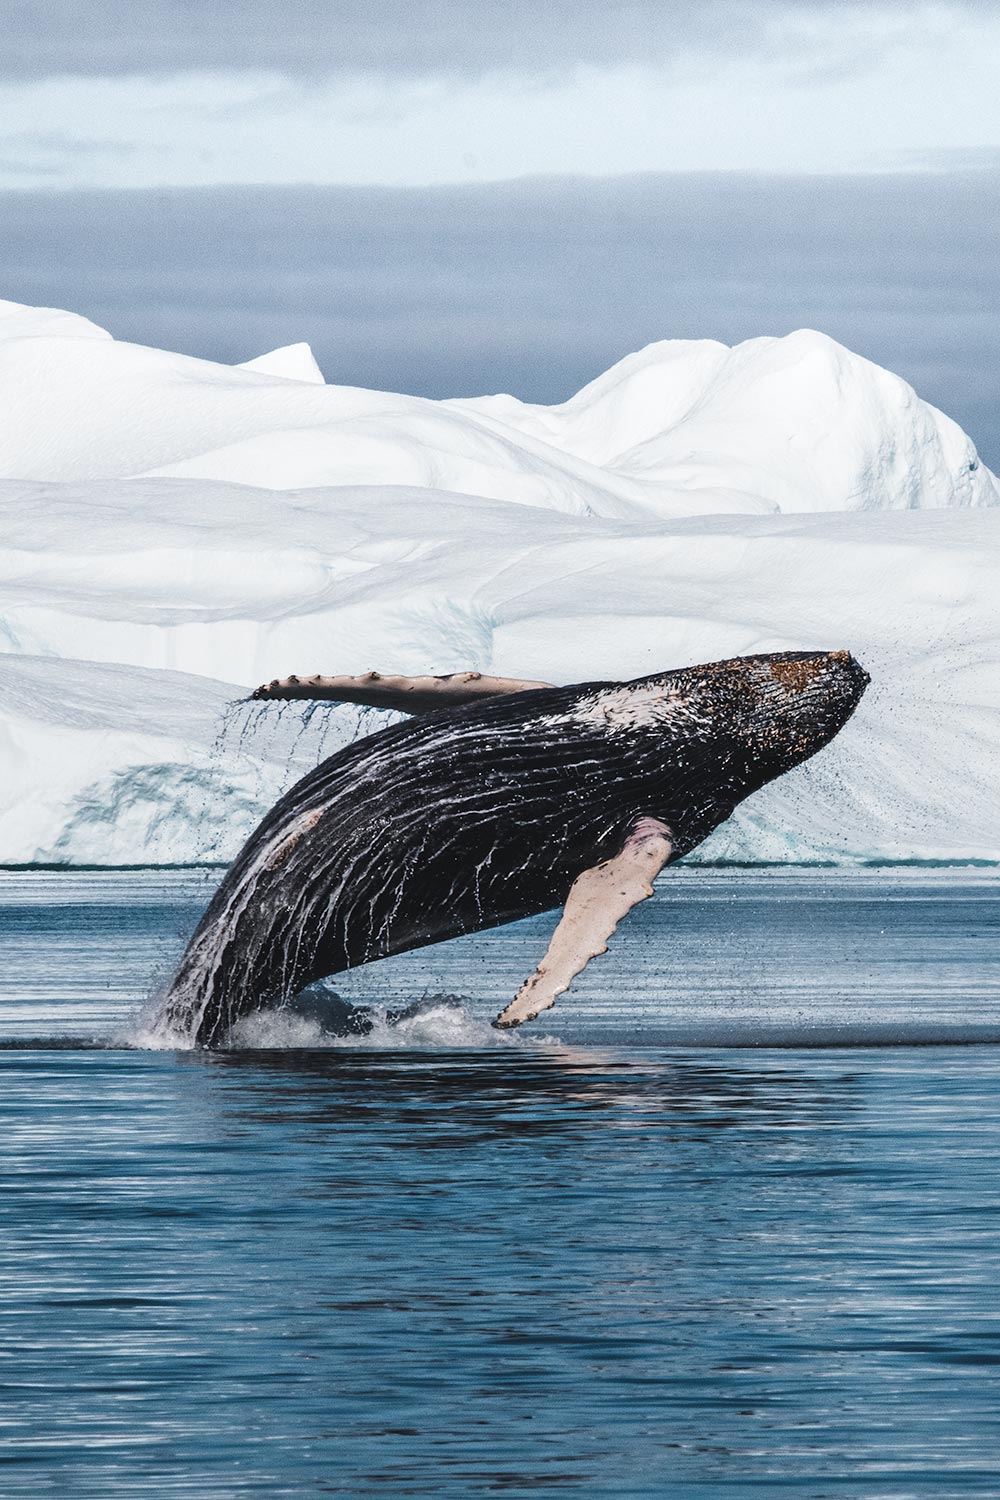 Scenic wonders of Ilulissat on a whale tour – Immerse yourself in the beauty of Greenland whale watching adventures.